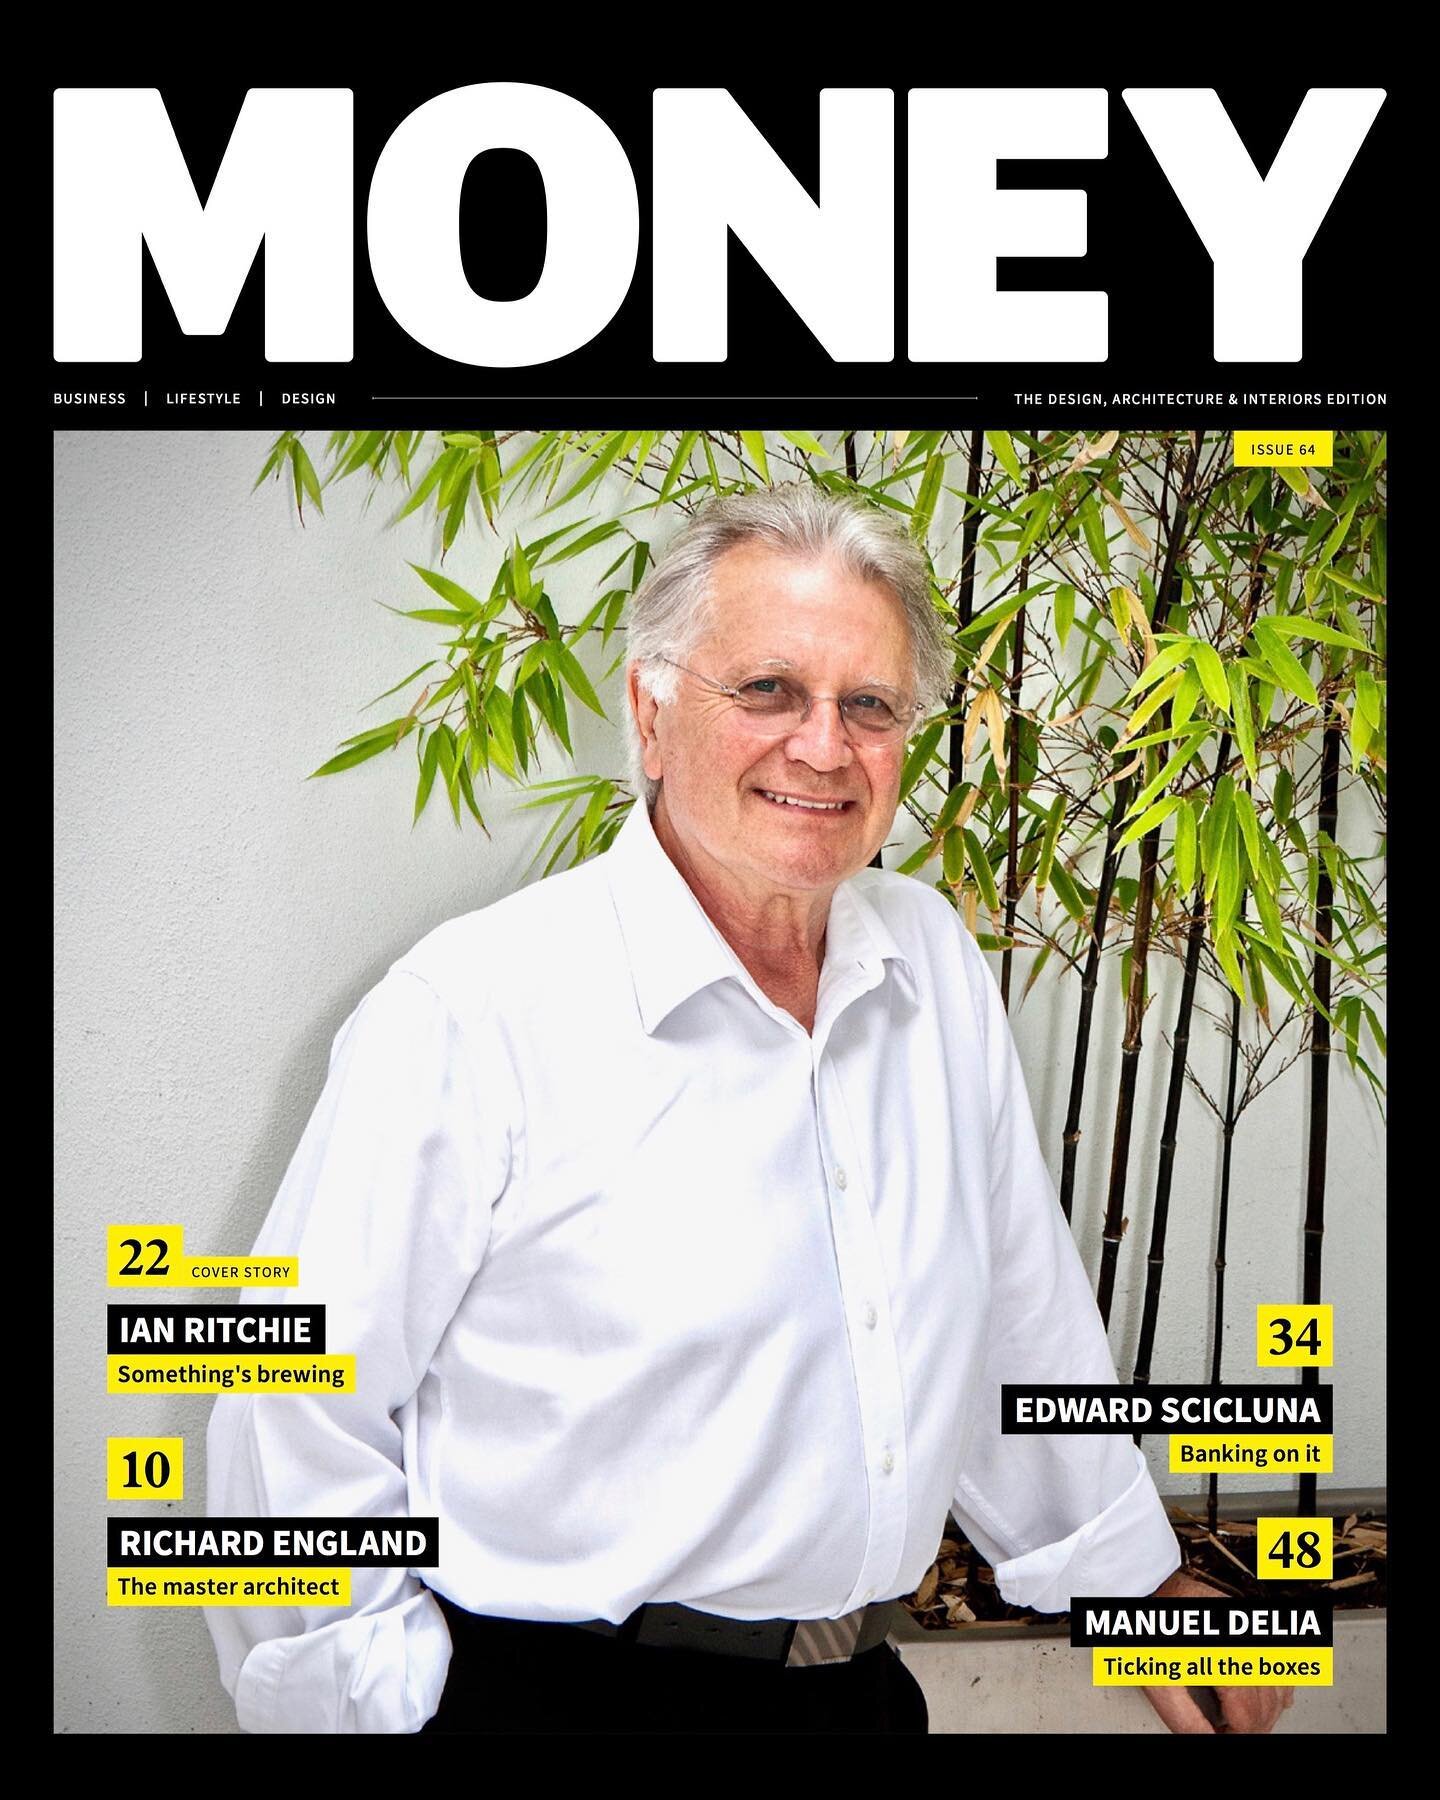 .
The March edition is up and loaded. Be the first to read the online version! 🤓 💪 🌟
.
🖥📱 http://bit.ly/Money64
.
#moneymag #tridentpark #ianritchie #hiliventures #anchovy #richardengland #economy #sustainability #politics #edwardscicluna #desig